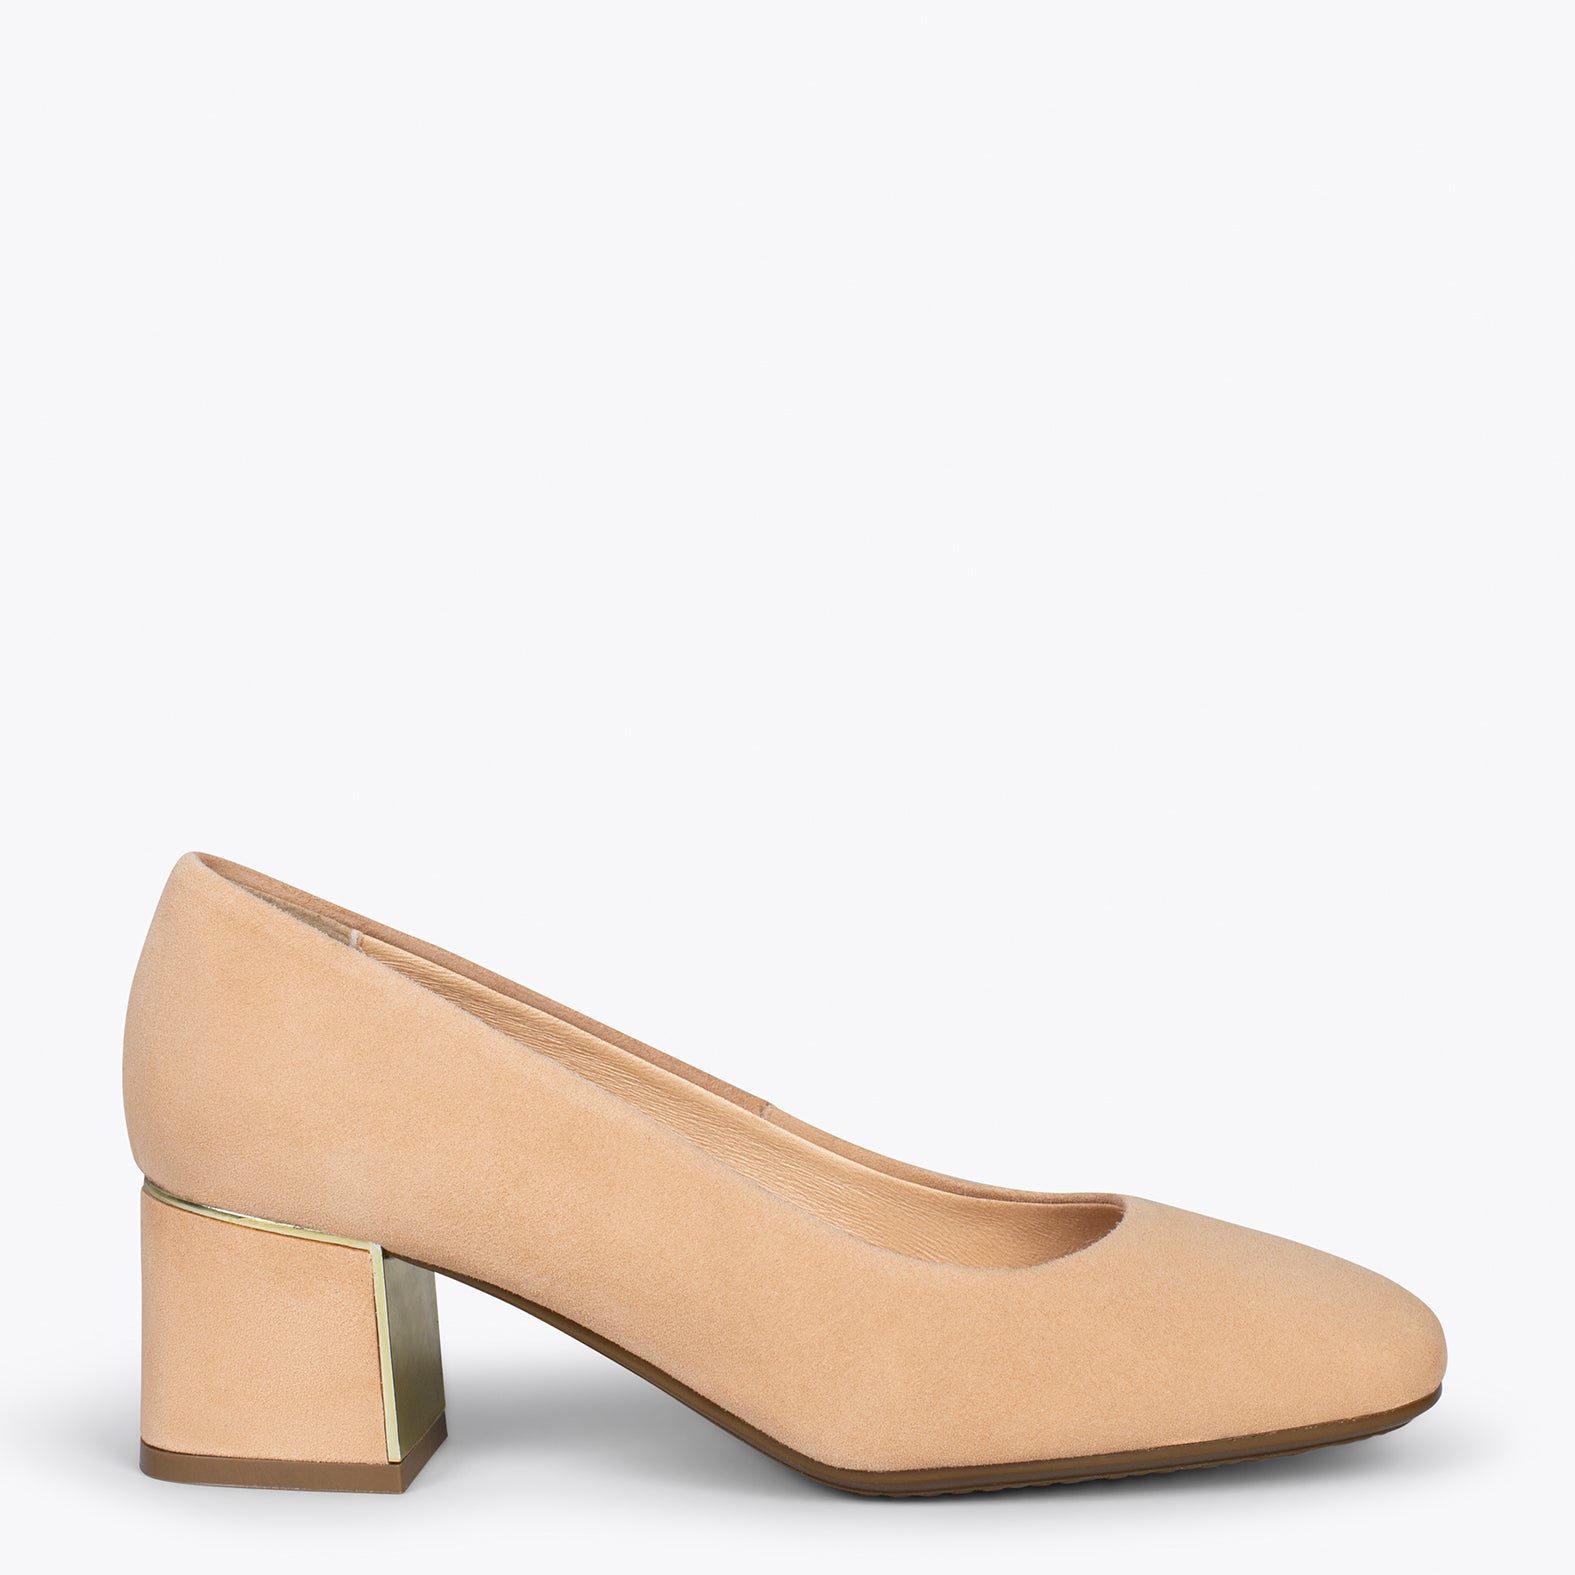 FEMME – CAMEL mid heel shoes with square toe